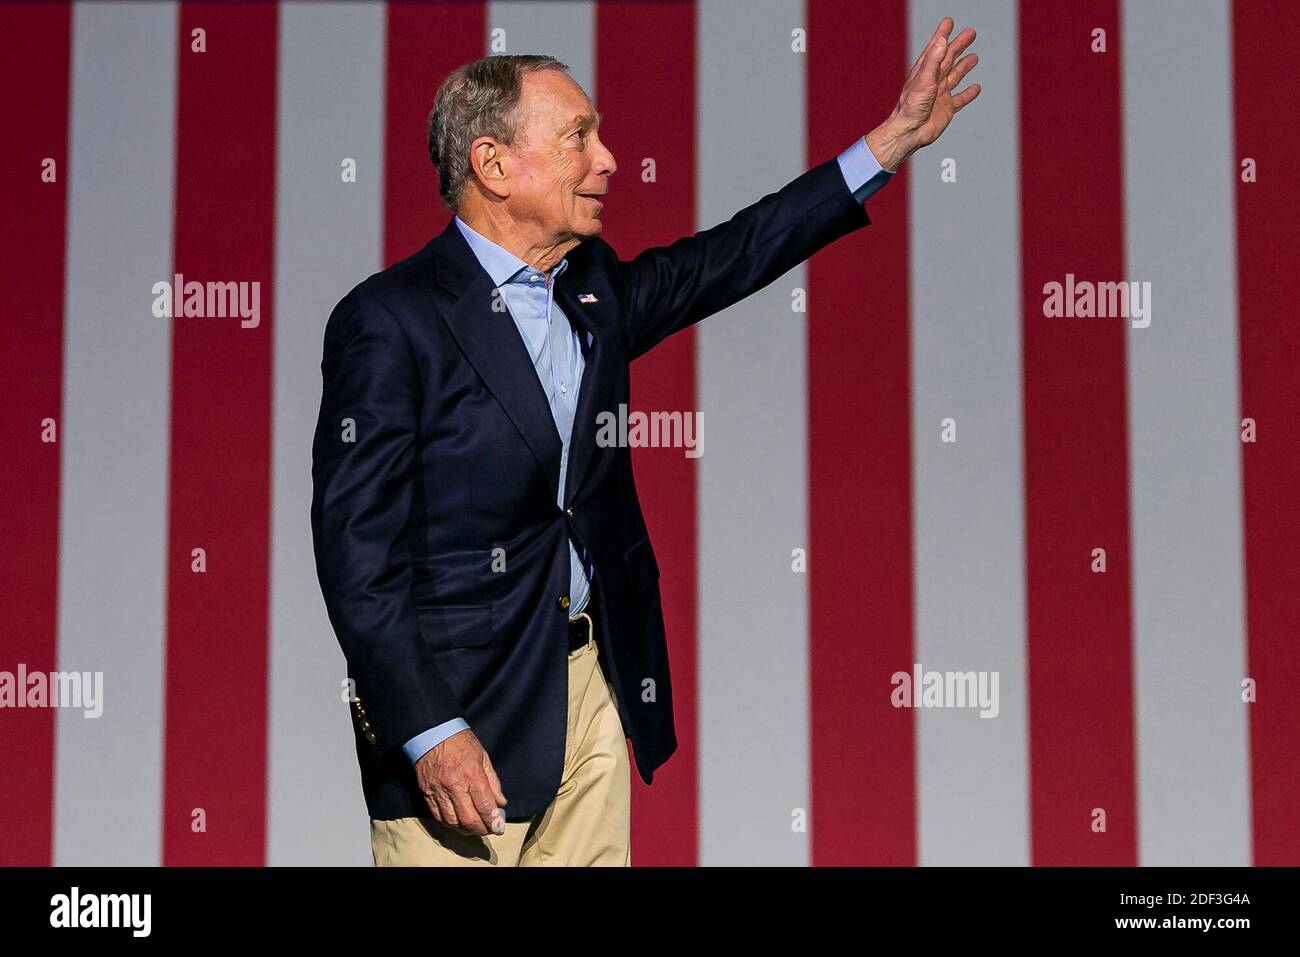 NO FILM, NO VIDEO, NO TV, NO DOCUMENTARY - Democratic presidential candidate Mike Bloomberg waves to supporters as he arrives to his campaign rally at the Palm Beach County Convention Center in West Palm Beach, FL, USA, on Tuesday, March 3, 2020. Photo by Matias J. Ocner/Miami Herald/TNS/ABACAPRESS.COM Stock Photo